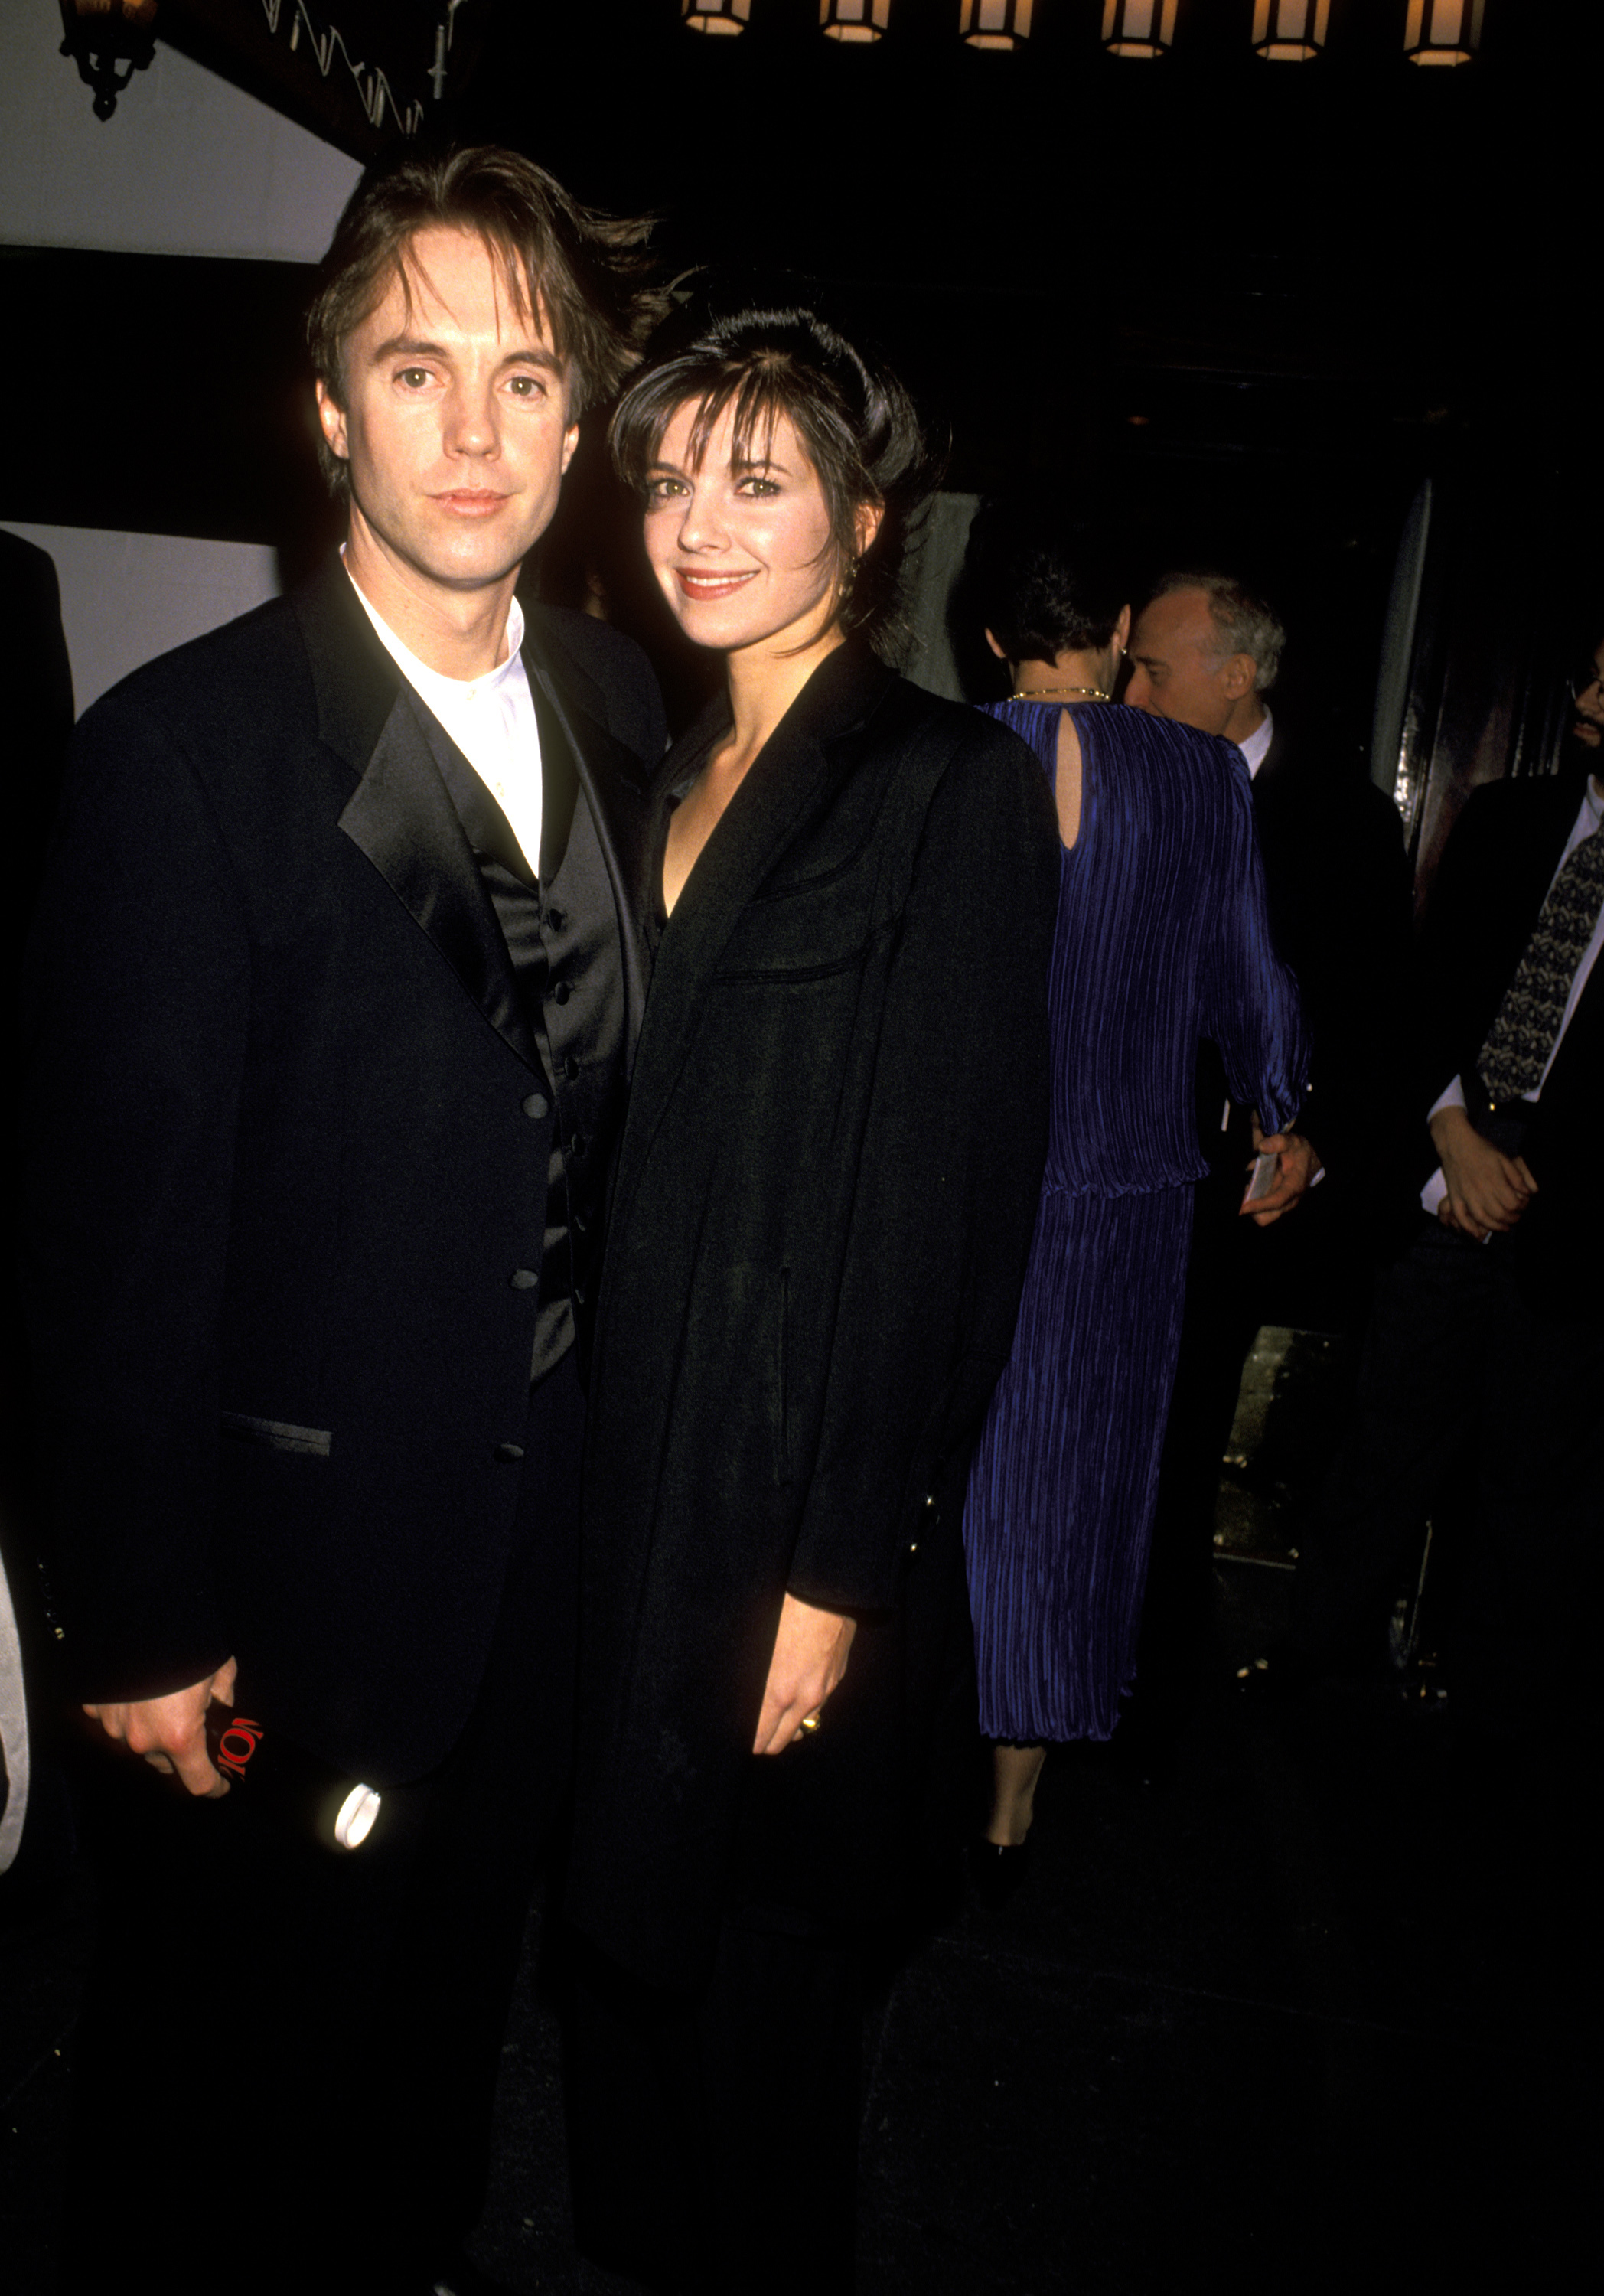 Shaun Cassidy and Susan Diol during Opening Night Party for Passion - May 9, 1994 at Sardi's Restaurant in New York City, New York, United States. | Source: Getty Images